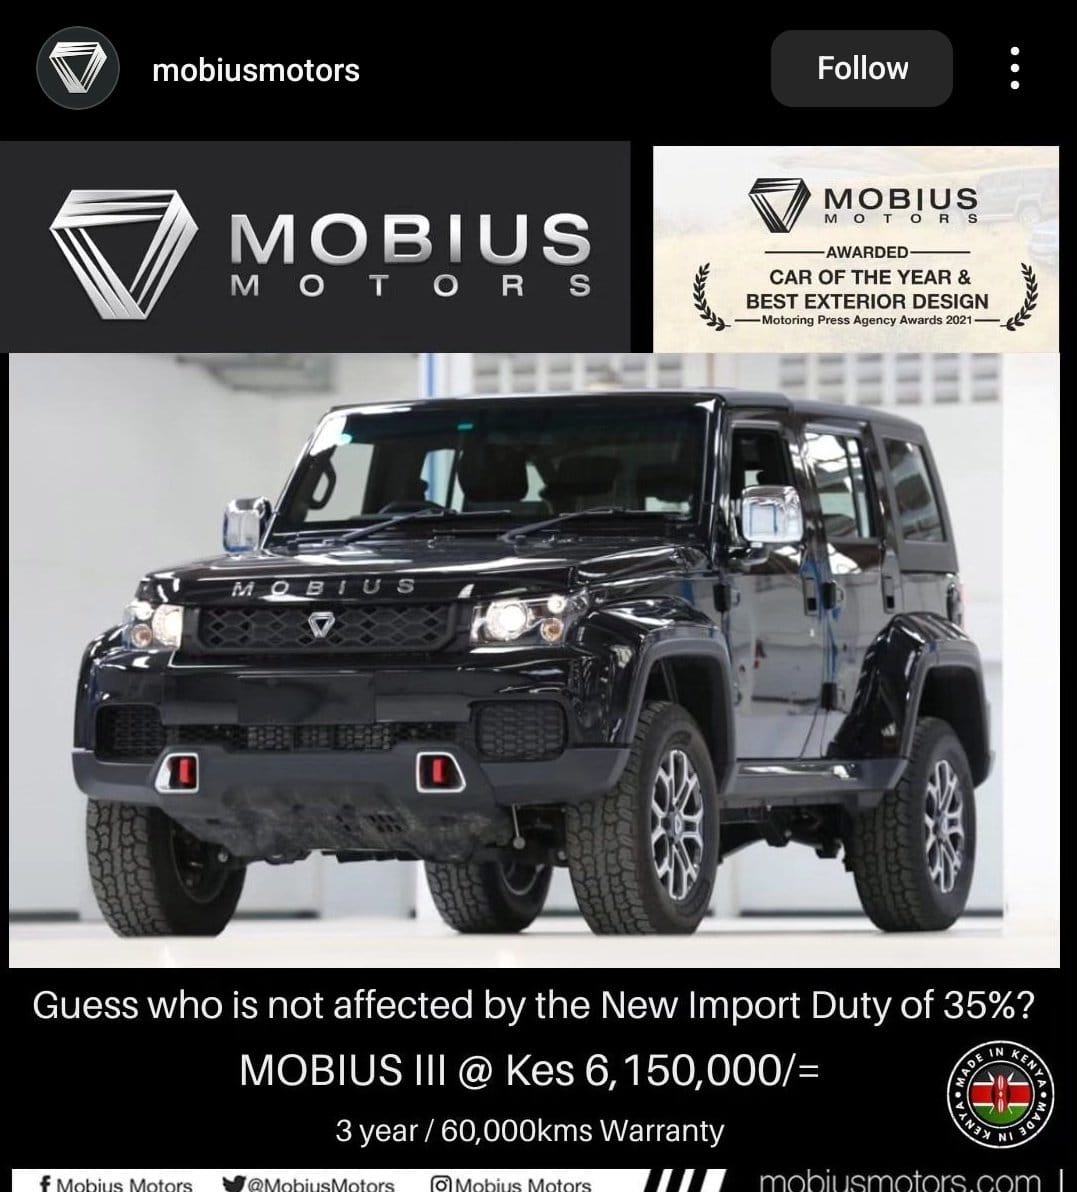 The Motoring Press Agency sure knows how to spot them #Kingmakers @MobiusMotors